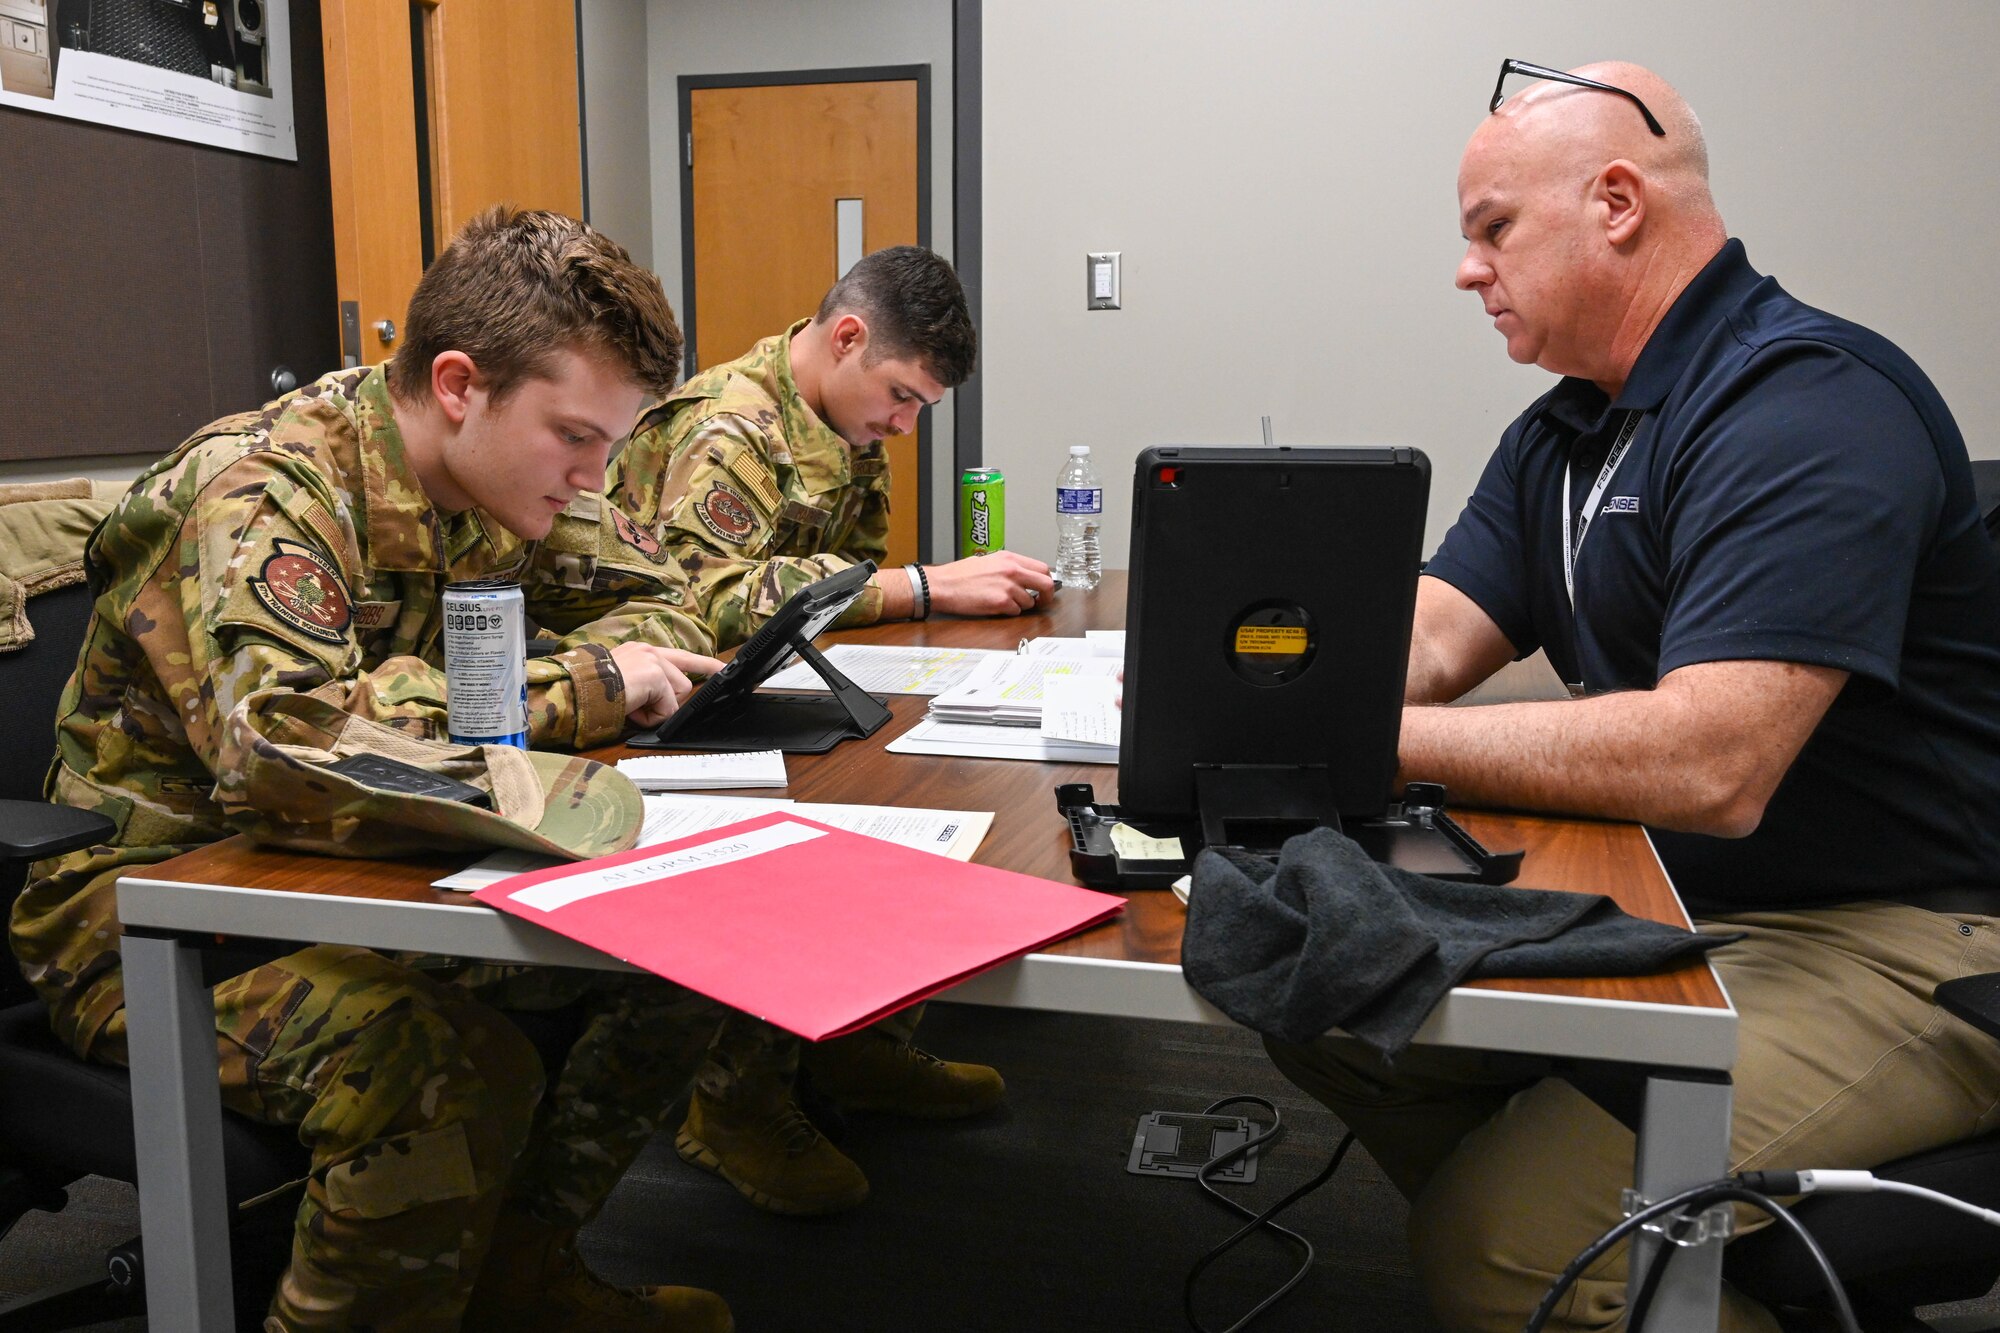 From left, Airman 1st Class Luke Gibbs, 97th Training Squadron (TRS) boom operator student, Staff Sgt. James Hargrove, 97th TRS boom operator student, and Mike Morris, KC-46 Pegasus boom operator instructor, go over a preflight plan before going into a simulator at Altus Air Force Base, Oklahoma, Nov. 29, 2022. Gibbs and Hargrove are both pipeline students, however, Hargrove is cross training from another career field. (U.S. Air Force photo by Senior Airman Trenton Jancze)